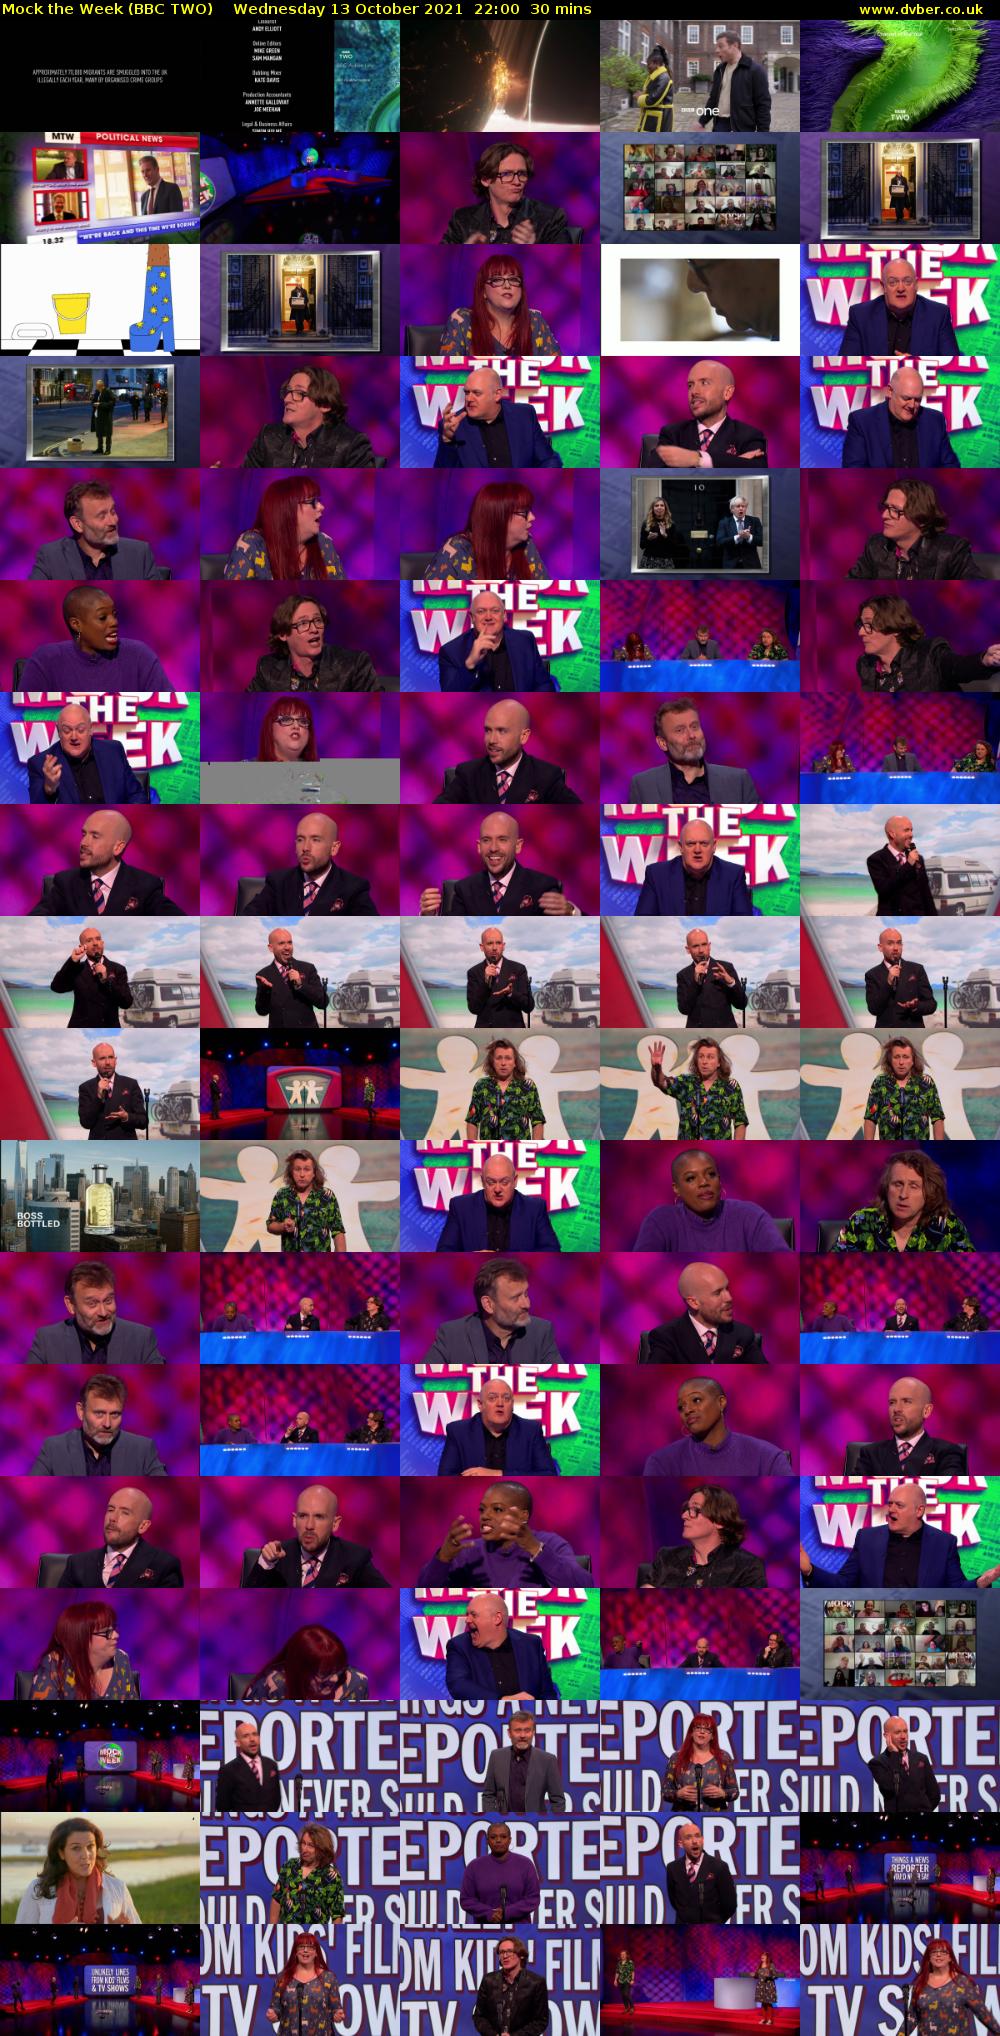 Mock the Week (BBC TWO) Wednesday 13 October 2021 22:00 - 22:30